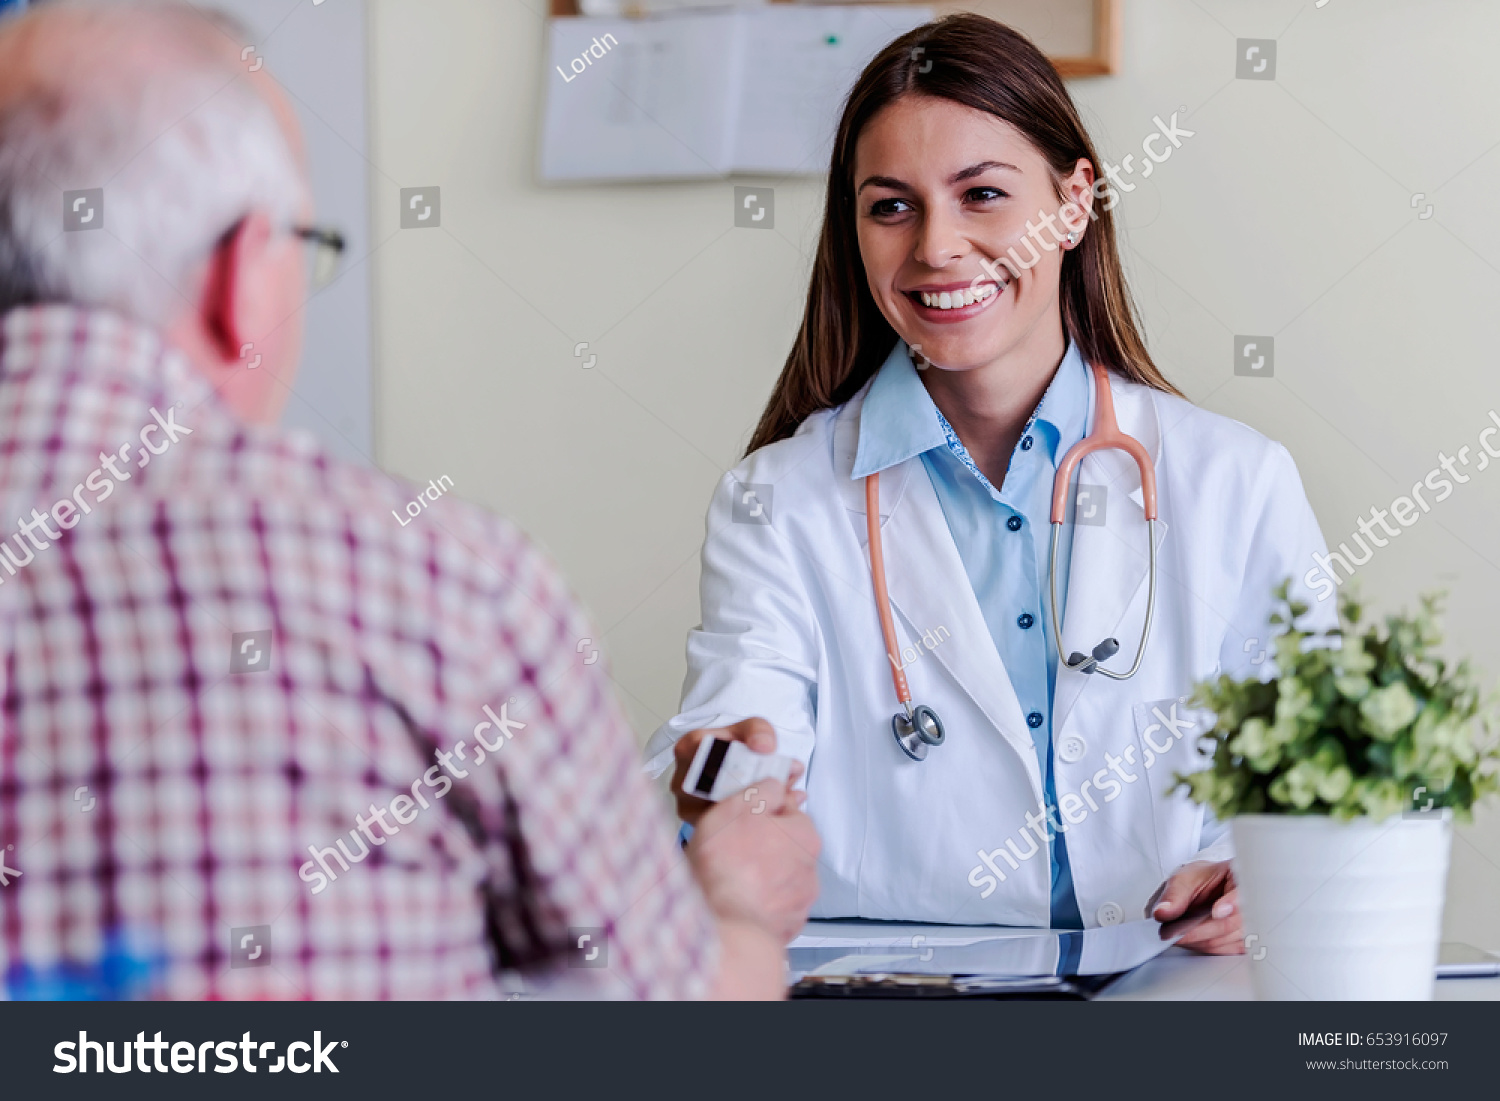 Older patient at woman doctor office paying exam with credit card #653916097